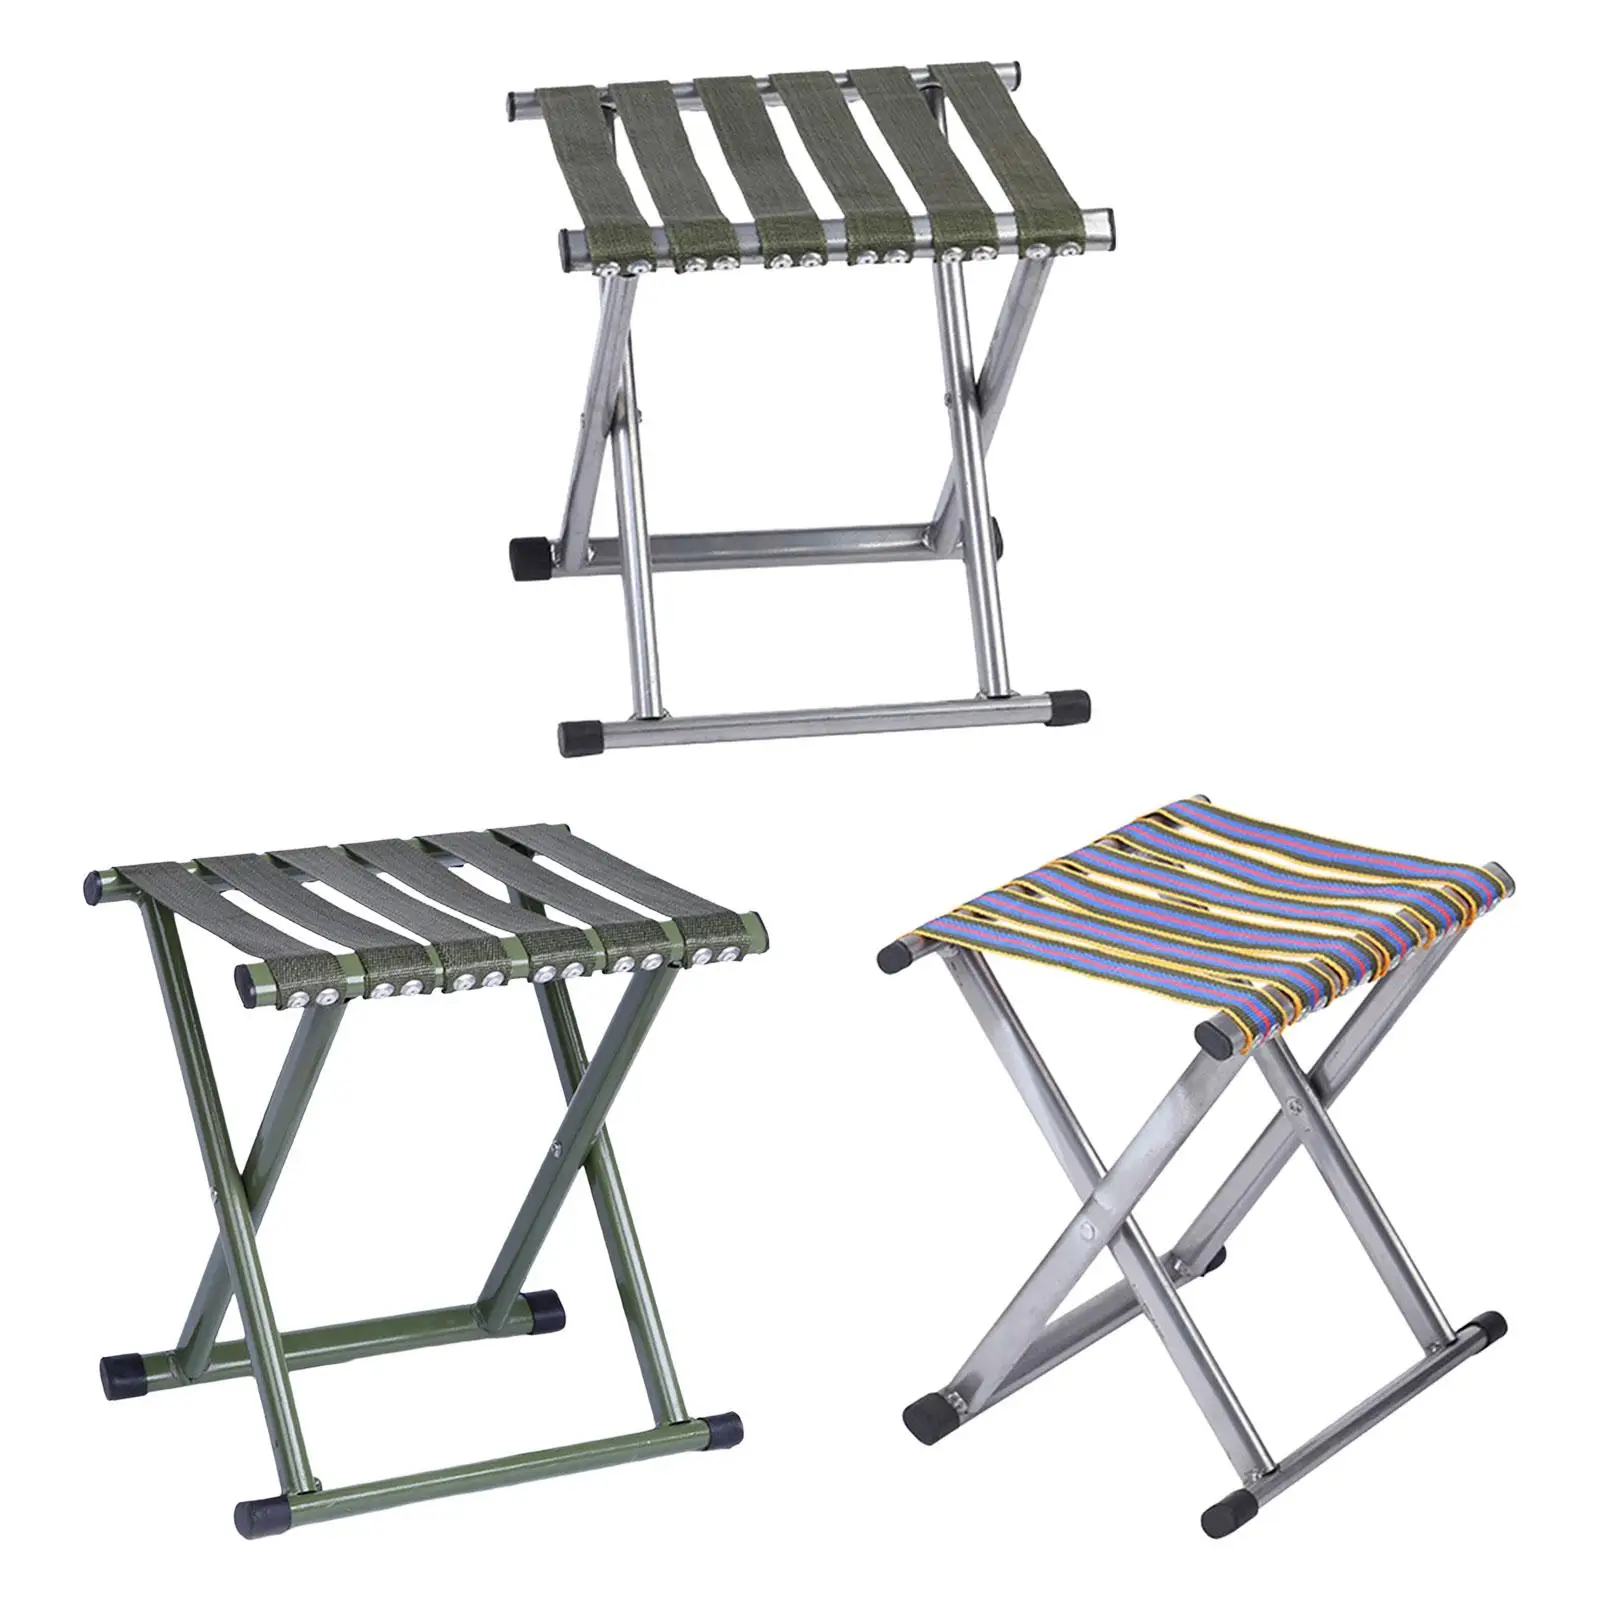 Camping Folding Stool, Foldable Footstool Chair Lightweight Saddle Chair Fishing Chair for Barbecue Concert Travel